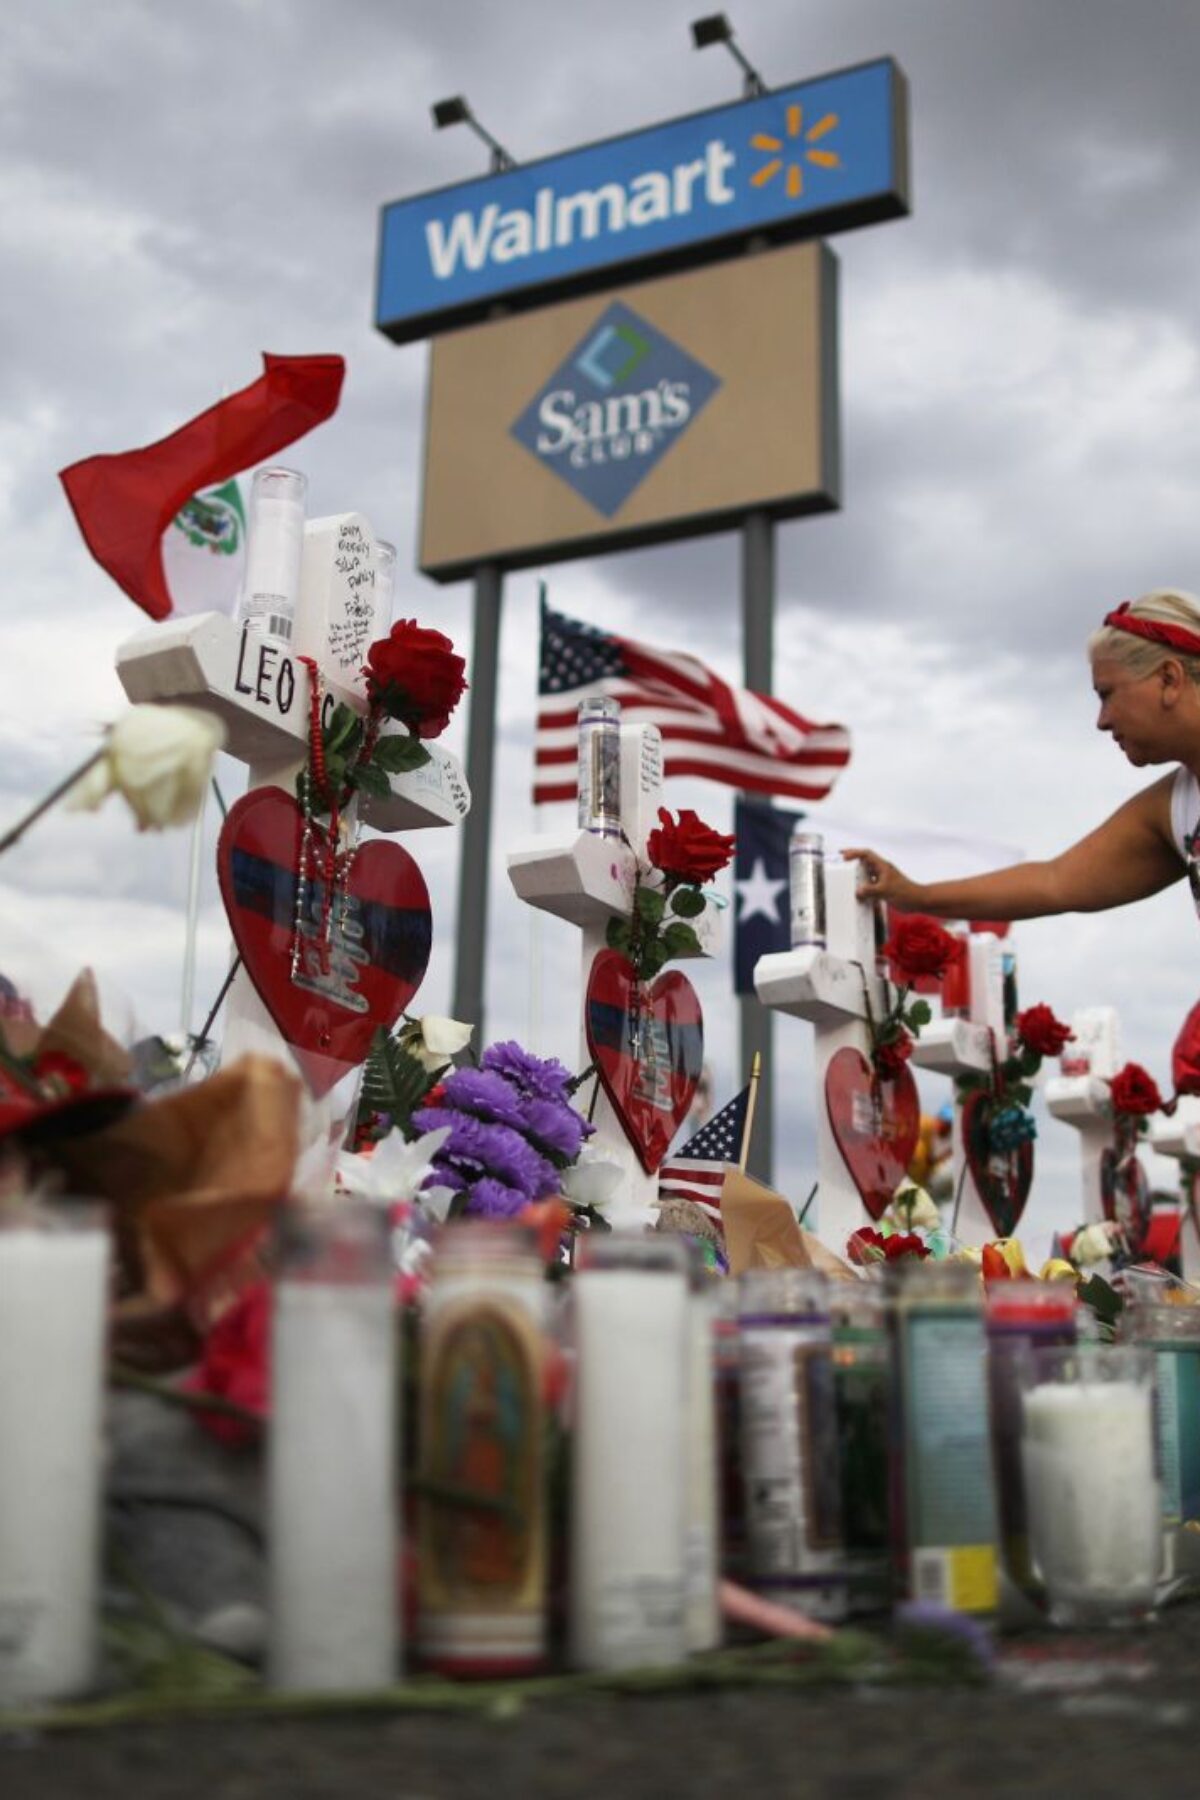 EL PASO, TEXAS - AUGUST 06: A woman touches a cross at a makeshift memorial for victims outside Walmart, near the scene of a mass shooting which left at least 22 people dead, on August 6, 2019 in El Paso, Texas. A 21-year-old white male suspect remains in custody in El Paso, which sits along the U.S.-Mexico border. President Donald Trump plans to visit the city August 7. (Photo by Mario Tama/Getty Images)